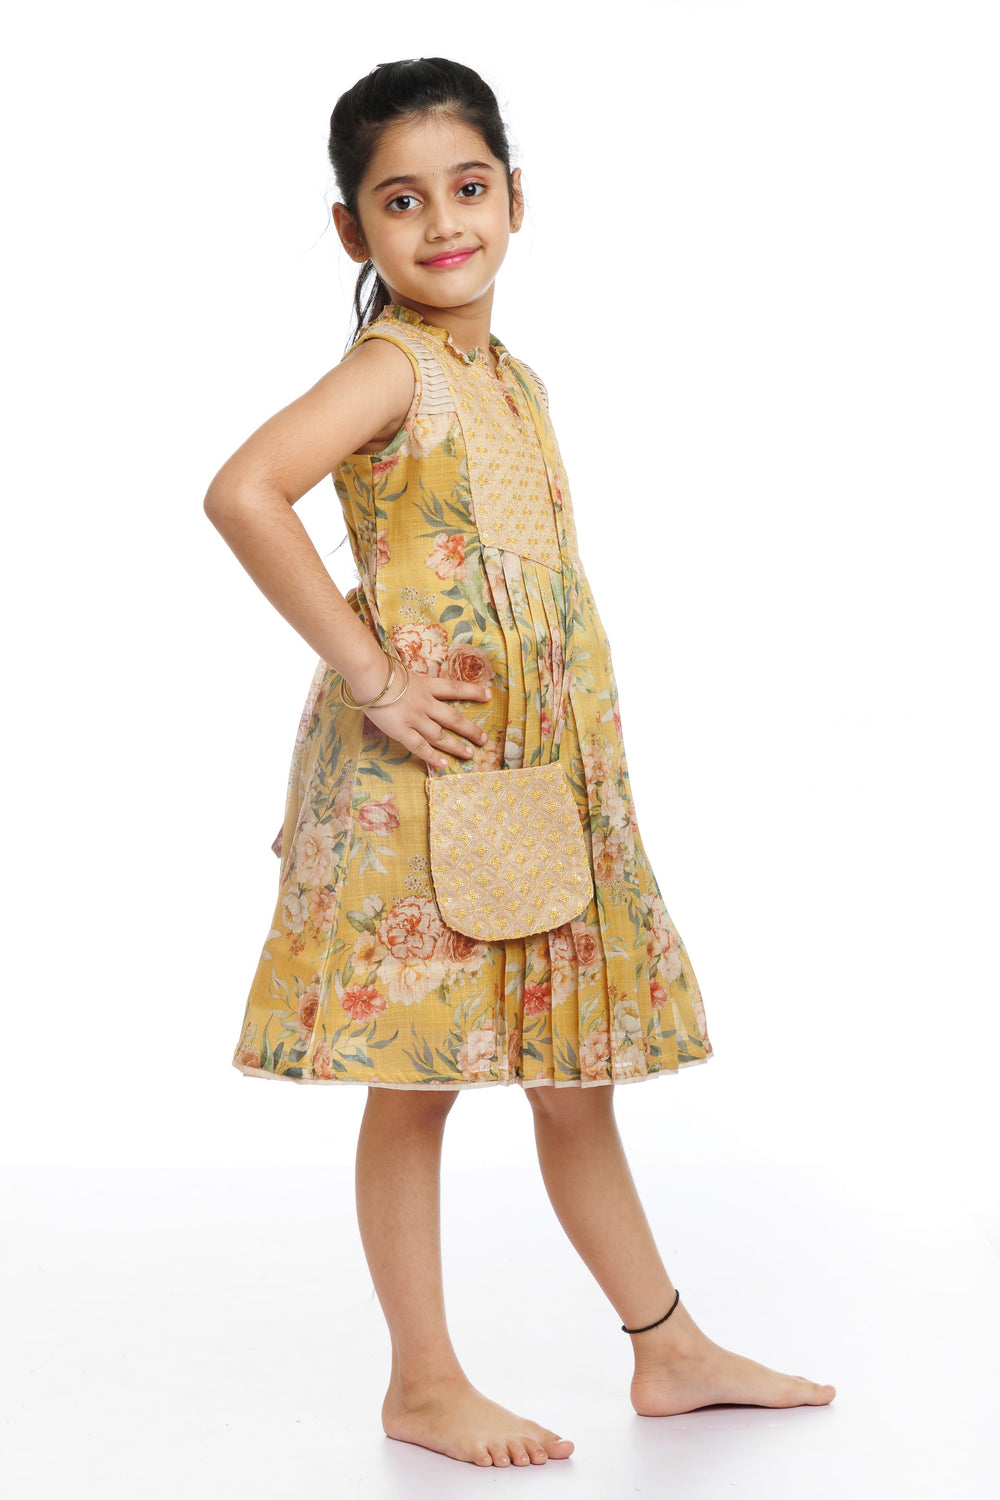 The Nesavu Girls Cotton Frock Golden Blossom: Girl's Playful Printed Cotton Frock Nesavu Get the Latest in Childrens Fashion with Our Designer Cotton Frocks | The Nesavu